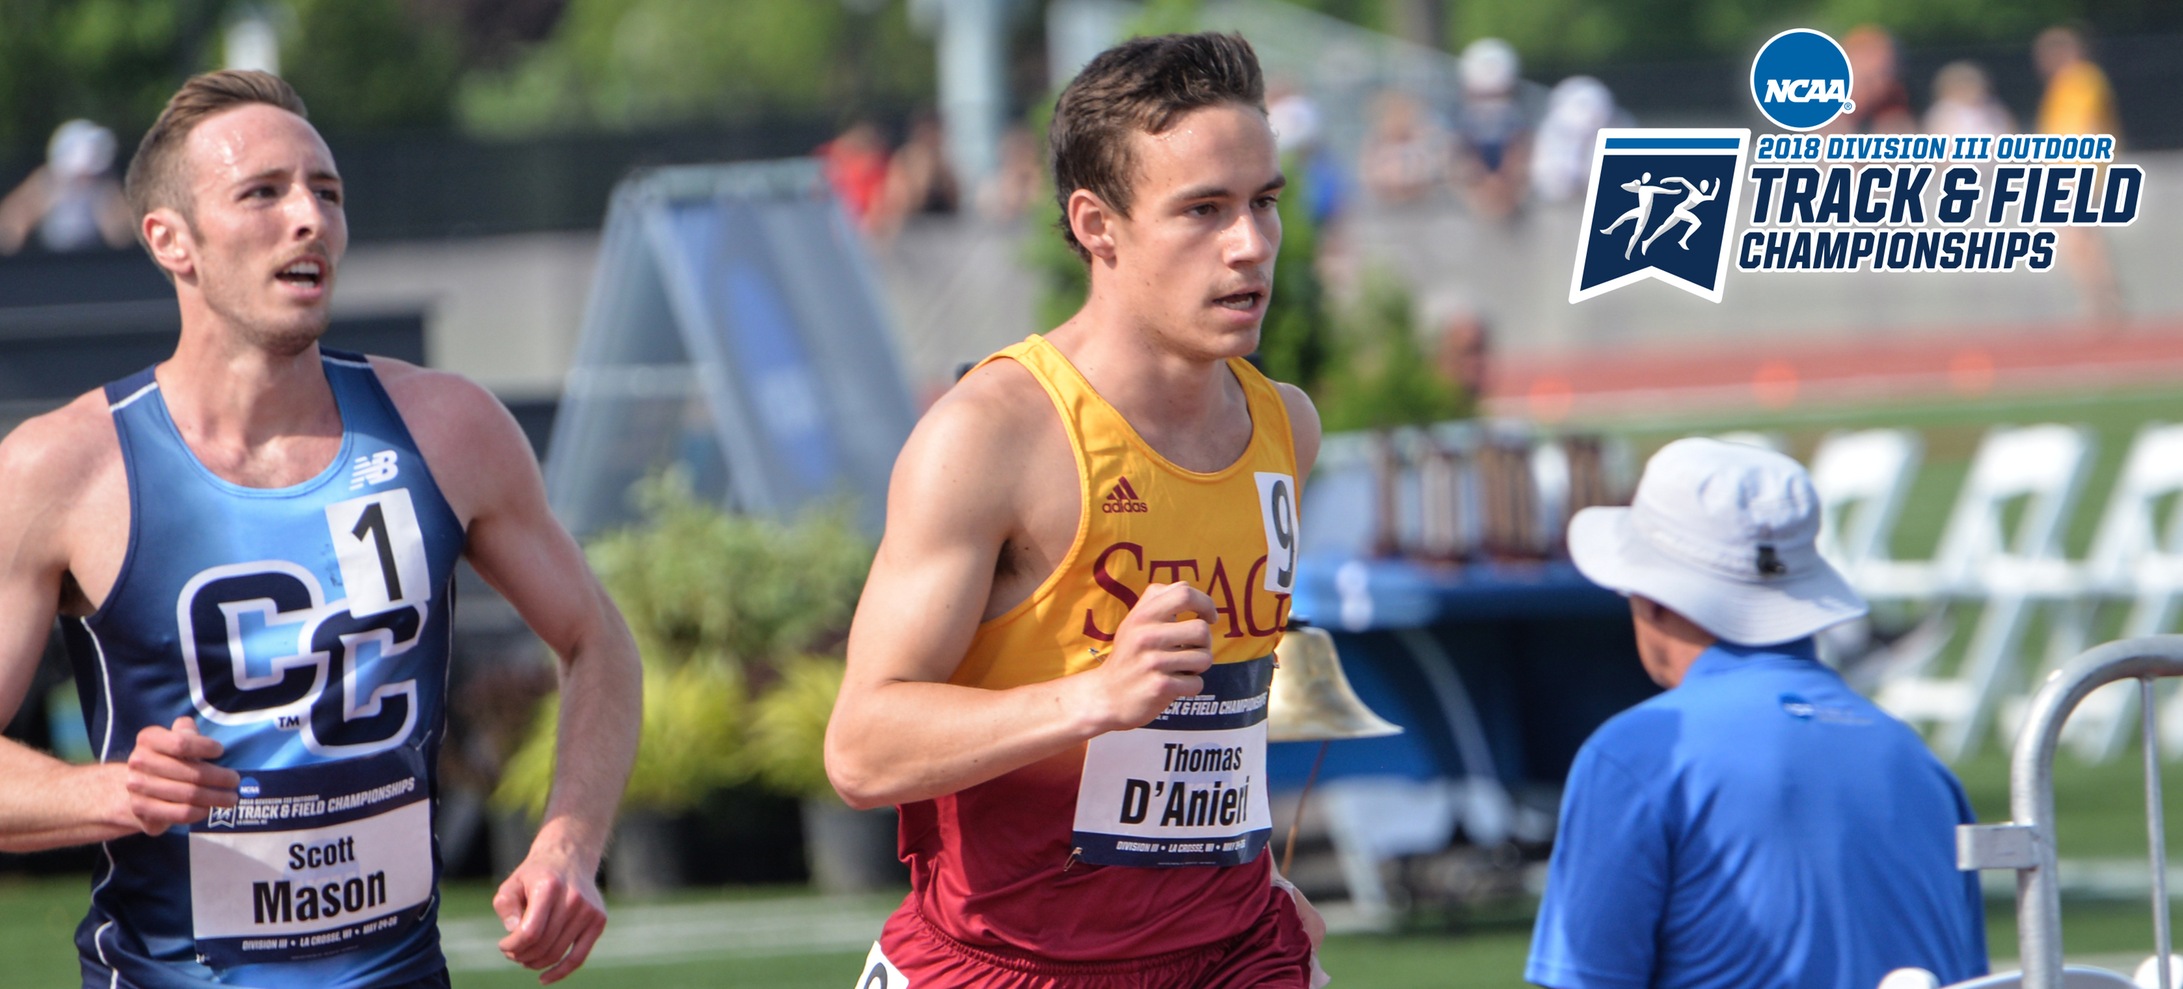 Thomas D'Anieri will race for the steeplechase National Title on Saturday. (photo credit: Chris Spells)